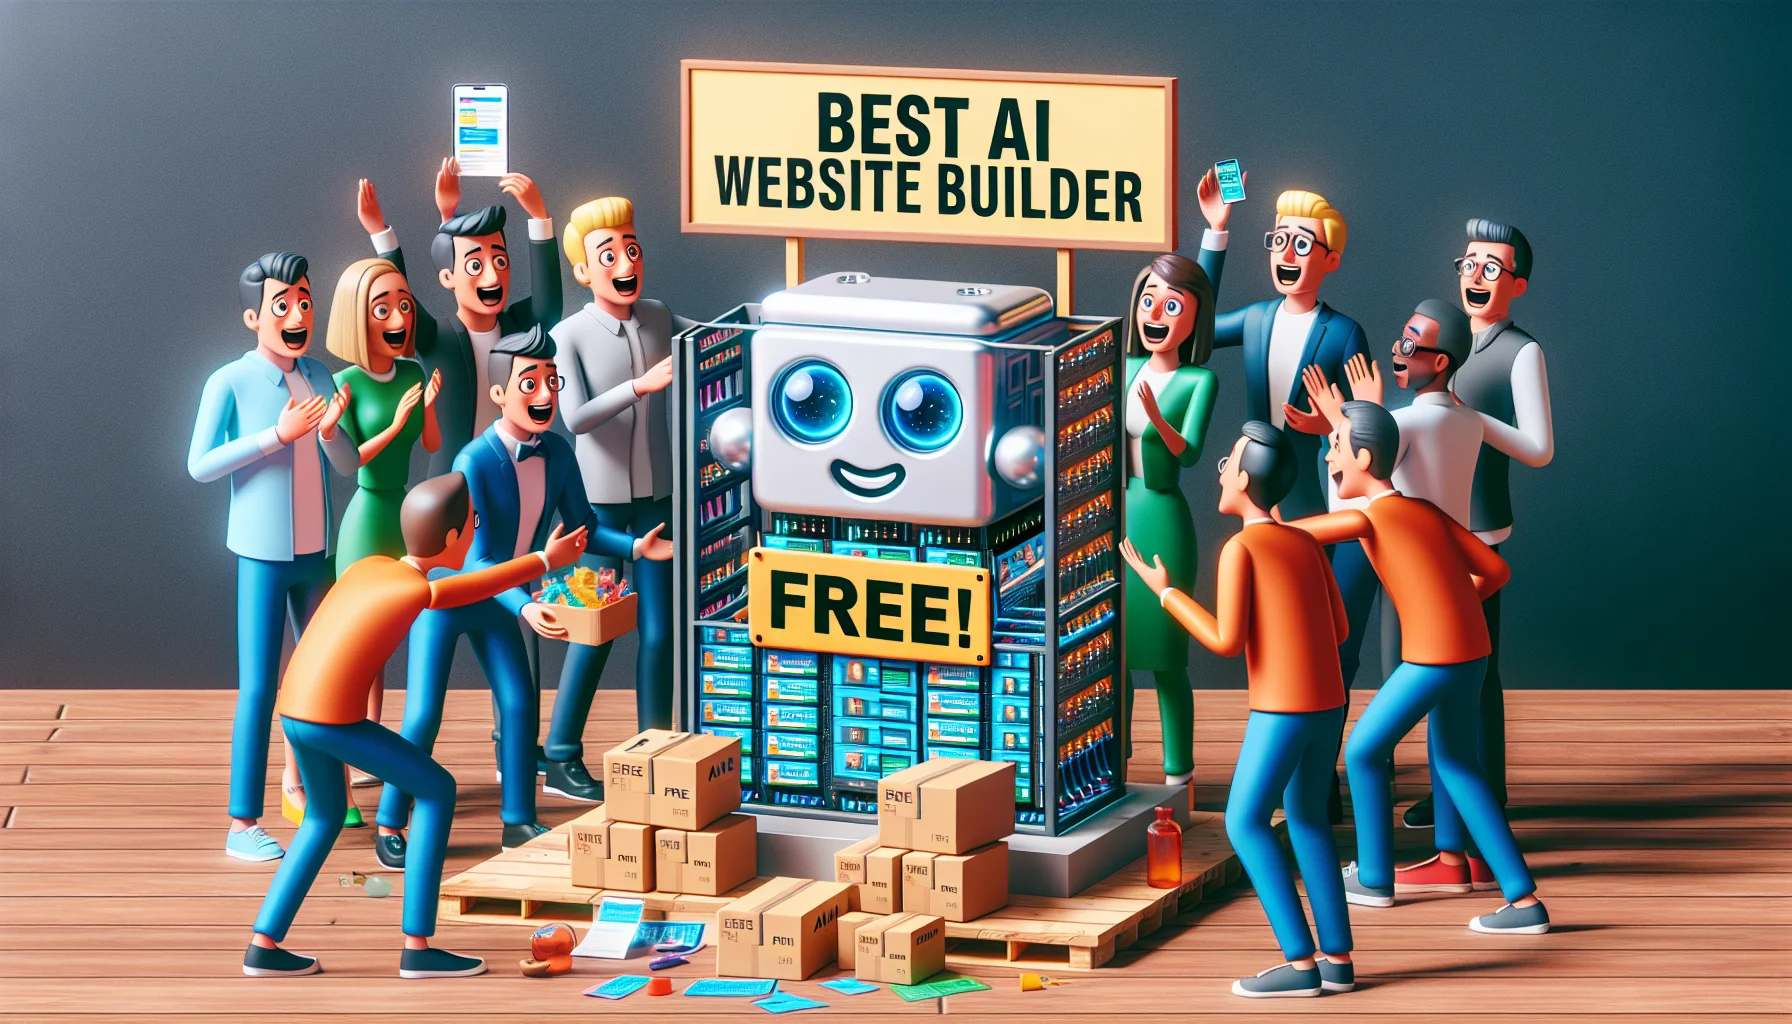 Create an imaginative yet somewhat realistic scene that humorously emphasizes the benefits of a free AI website builder. The scene should have an AI machine proudly showing off its website creation. It could feature a signboard saying 'Best AI Website Builder' and 'Free!' to emphasize the free part of it. For the humor component, show the AI adding fun and exciting elements on its website with a grin on its 'face'. Simultaneously, there are people from various descents and genders looking amazed while holding their web hosting server boxes. Make sure the scene is enticing and evokes a sense of intrigue about web hosting.